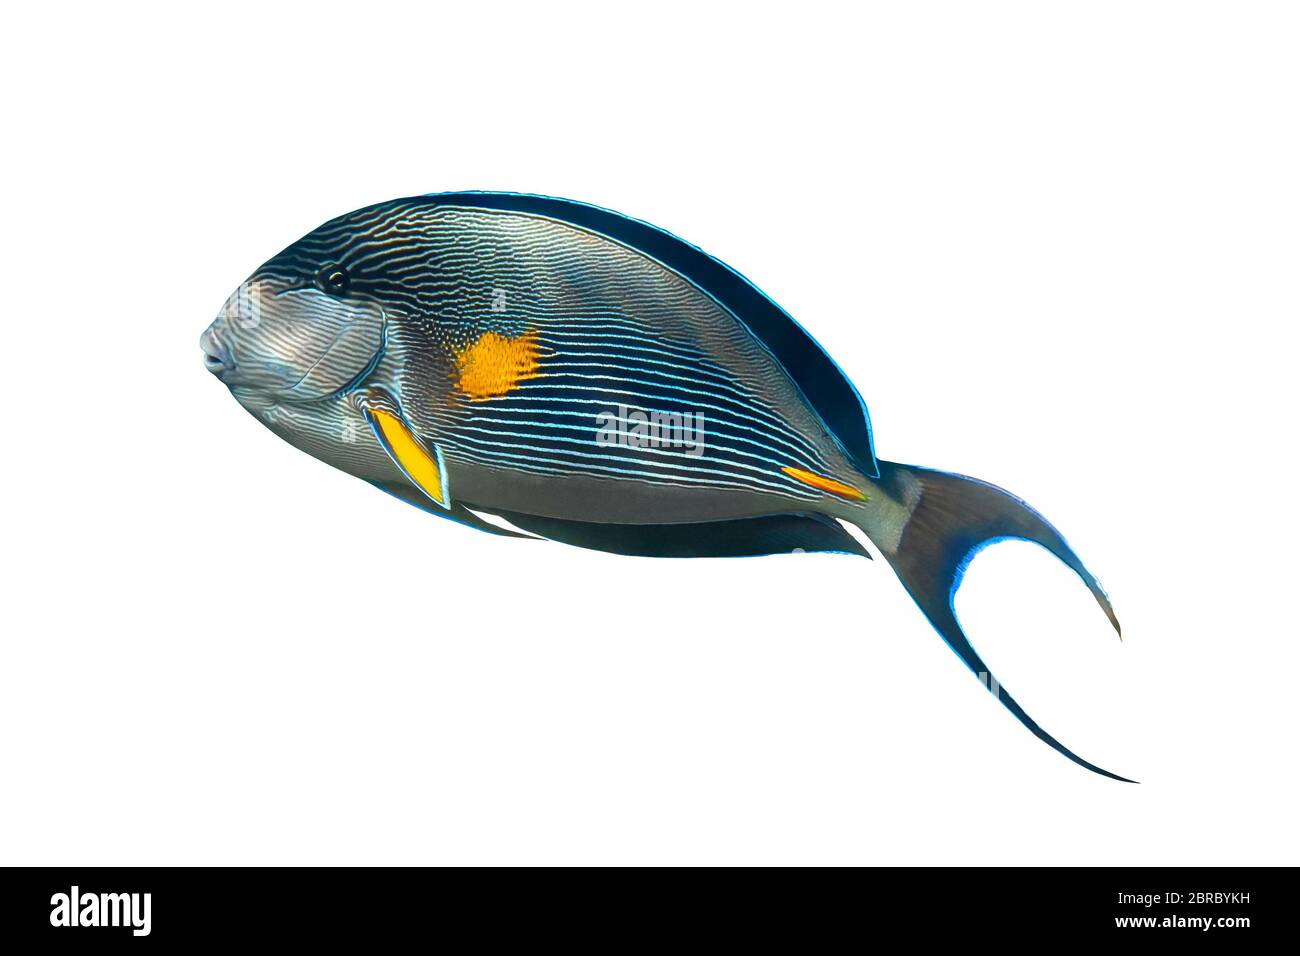 Sohal Surgeonfish (Acanthurus Sohal) Isotated On White Background. Tropical Fish With Black Fins, Yellow And Blue Stripes, Red Sea, Egypt. Side View, Stock Photo